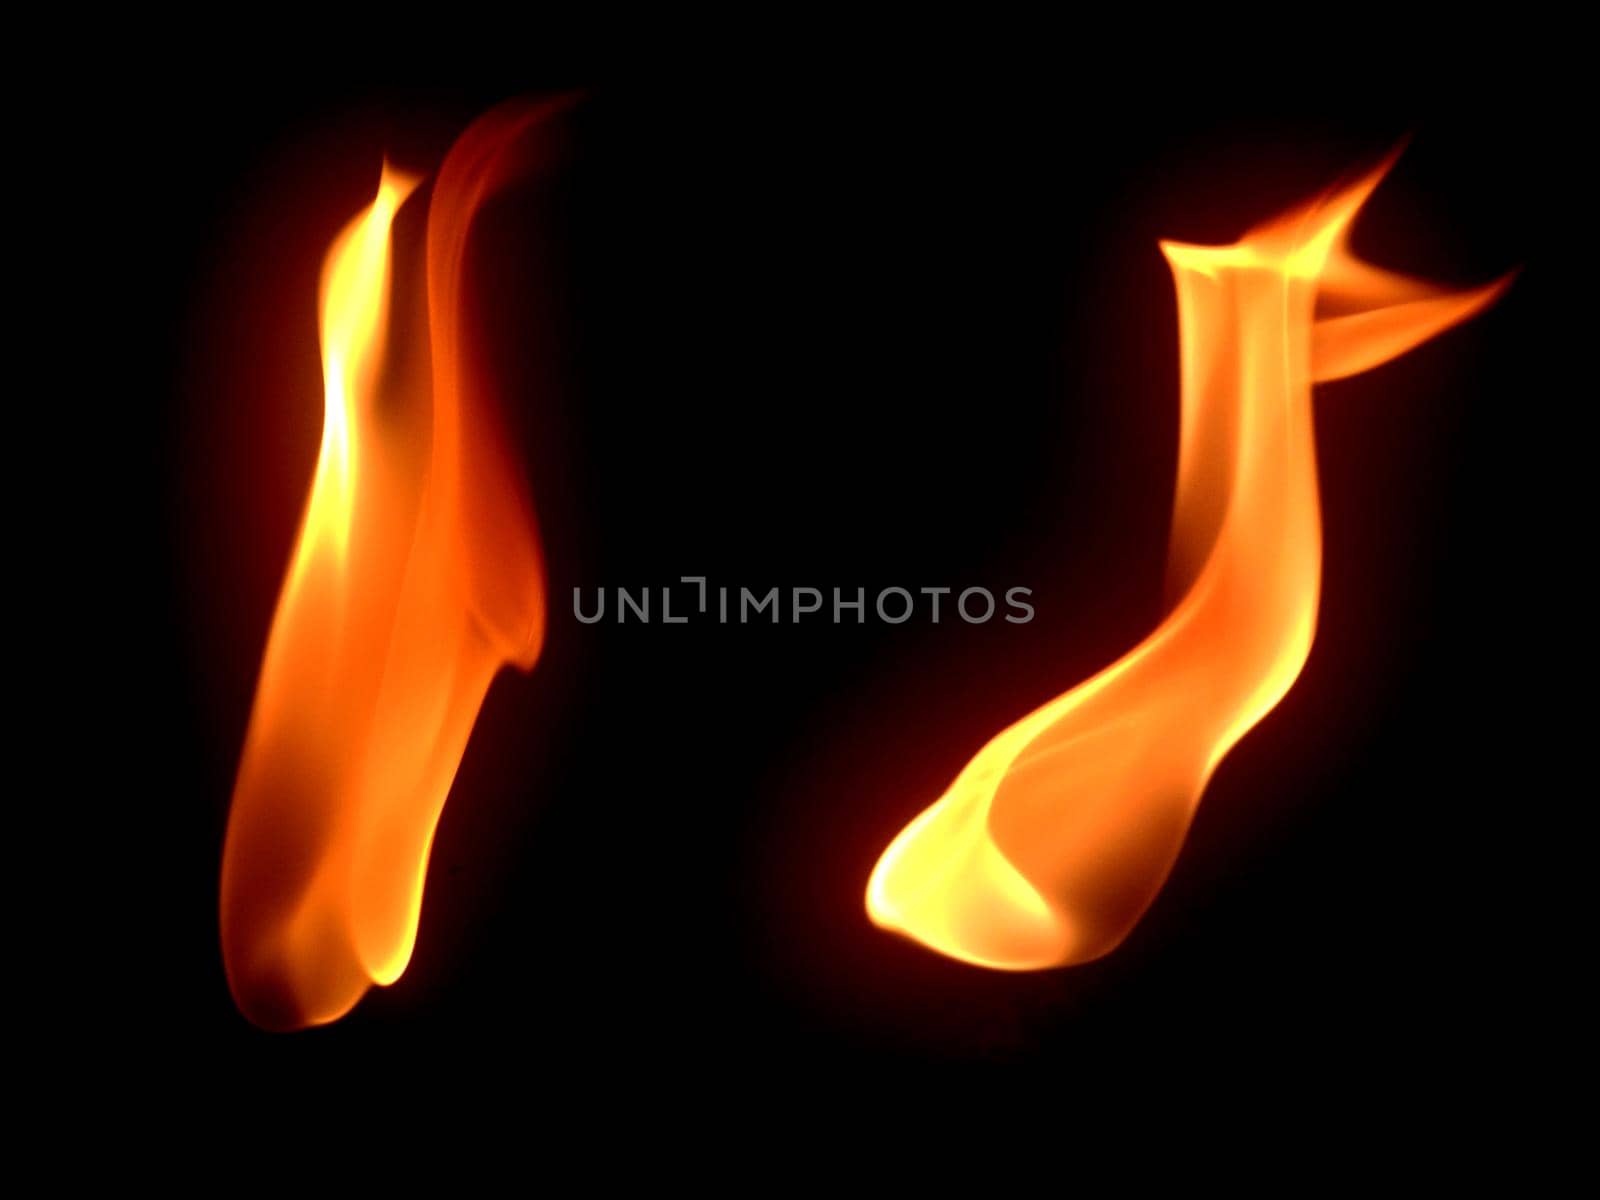 Two Burning Fire Flames on Black Isolated Background by tabishere